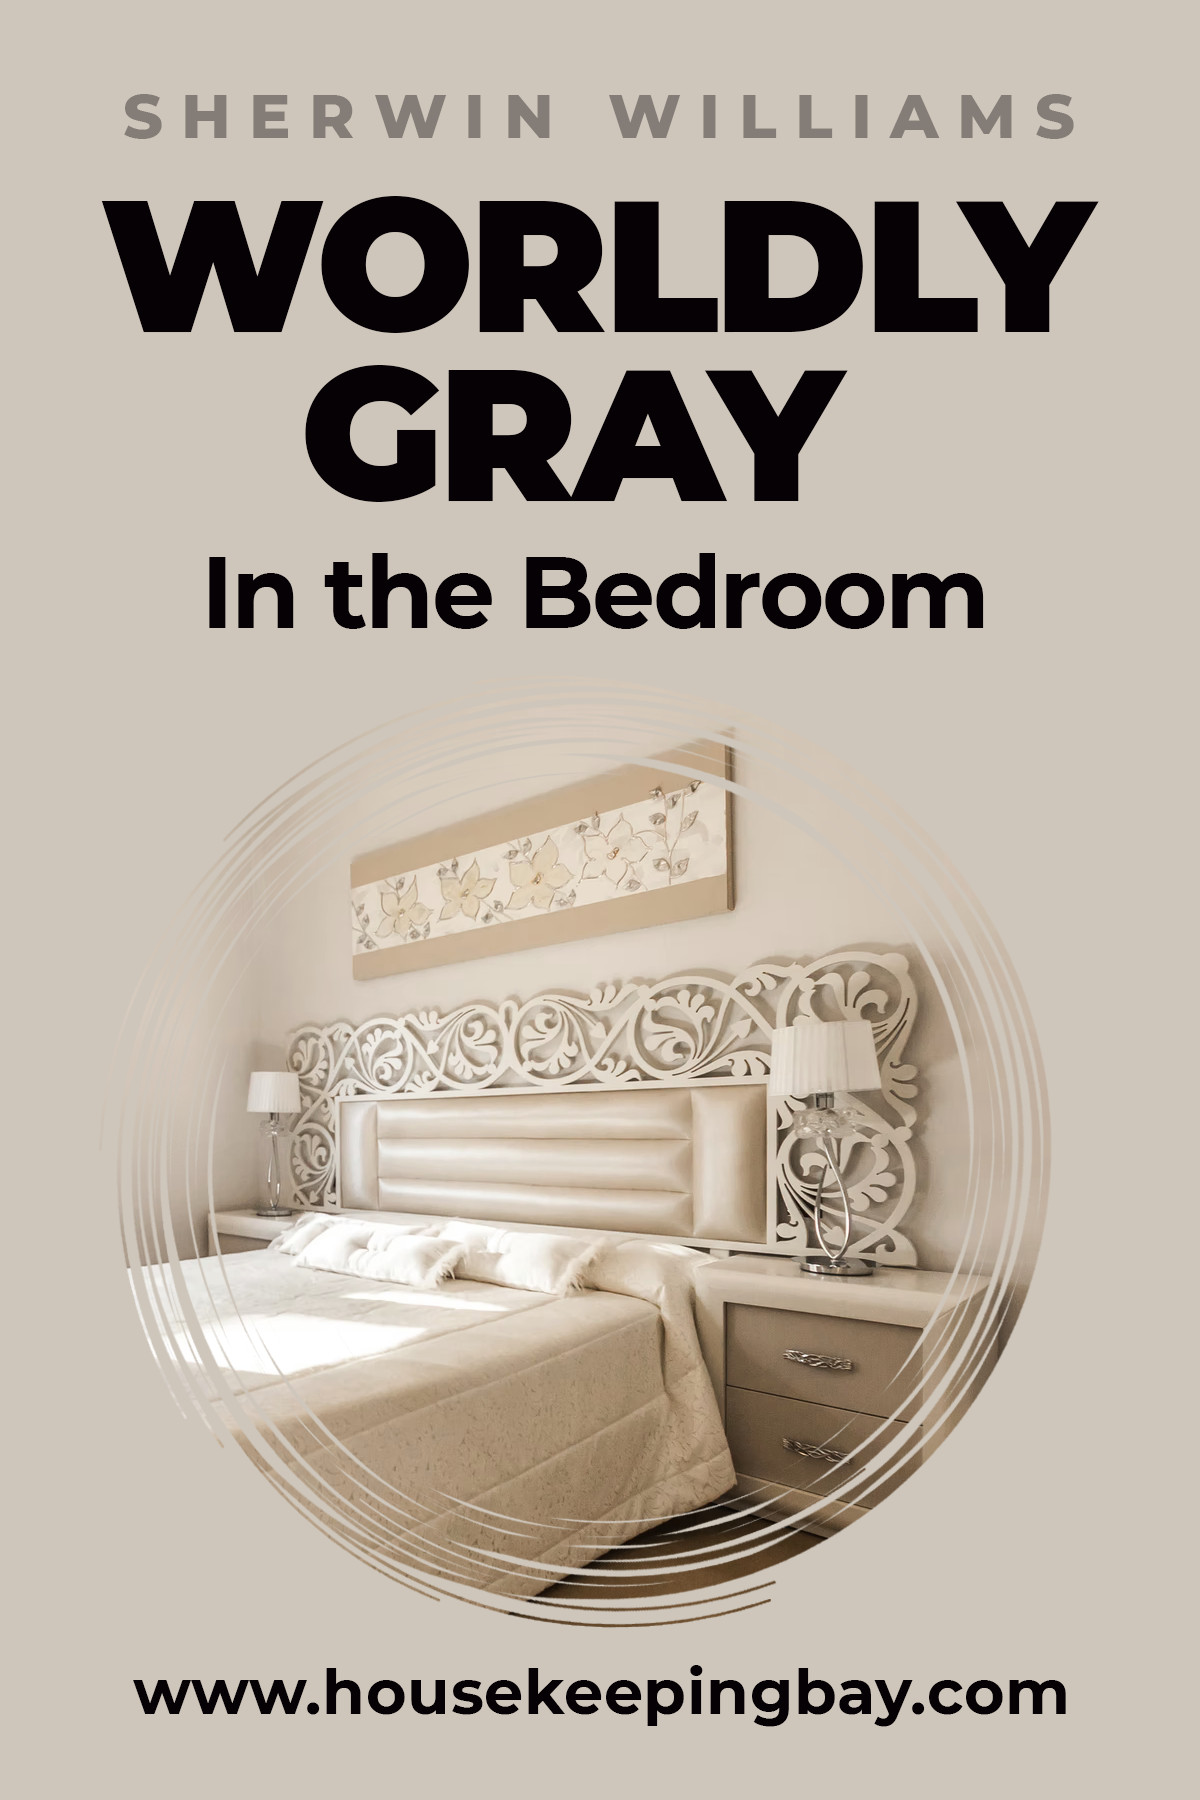 Worldly Gray in the bedroom